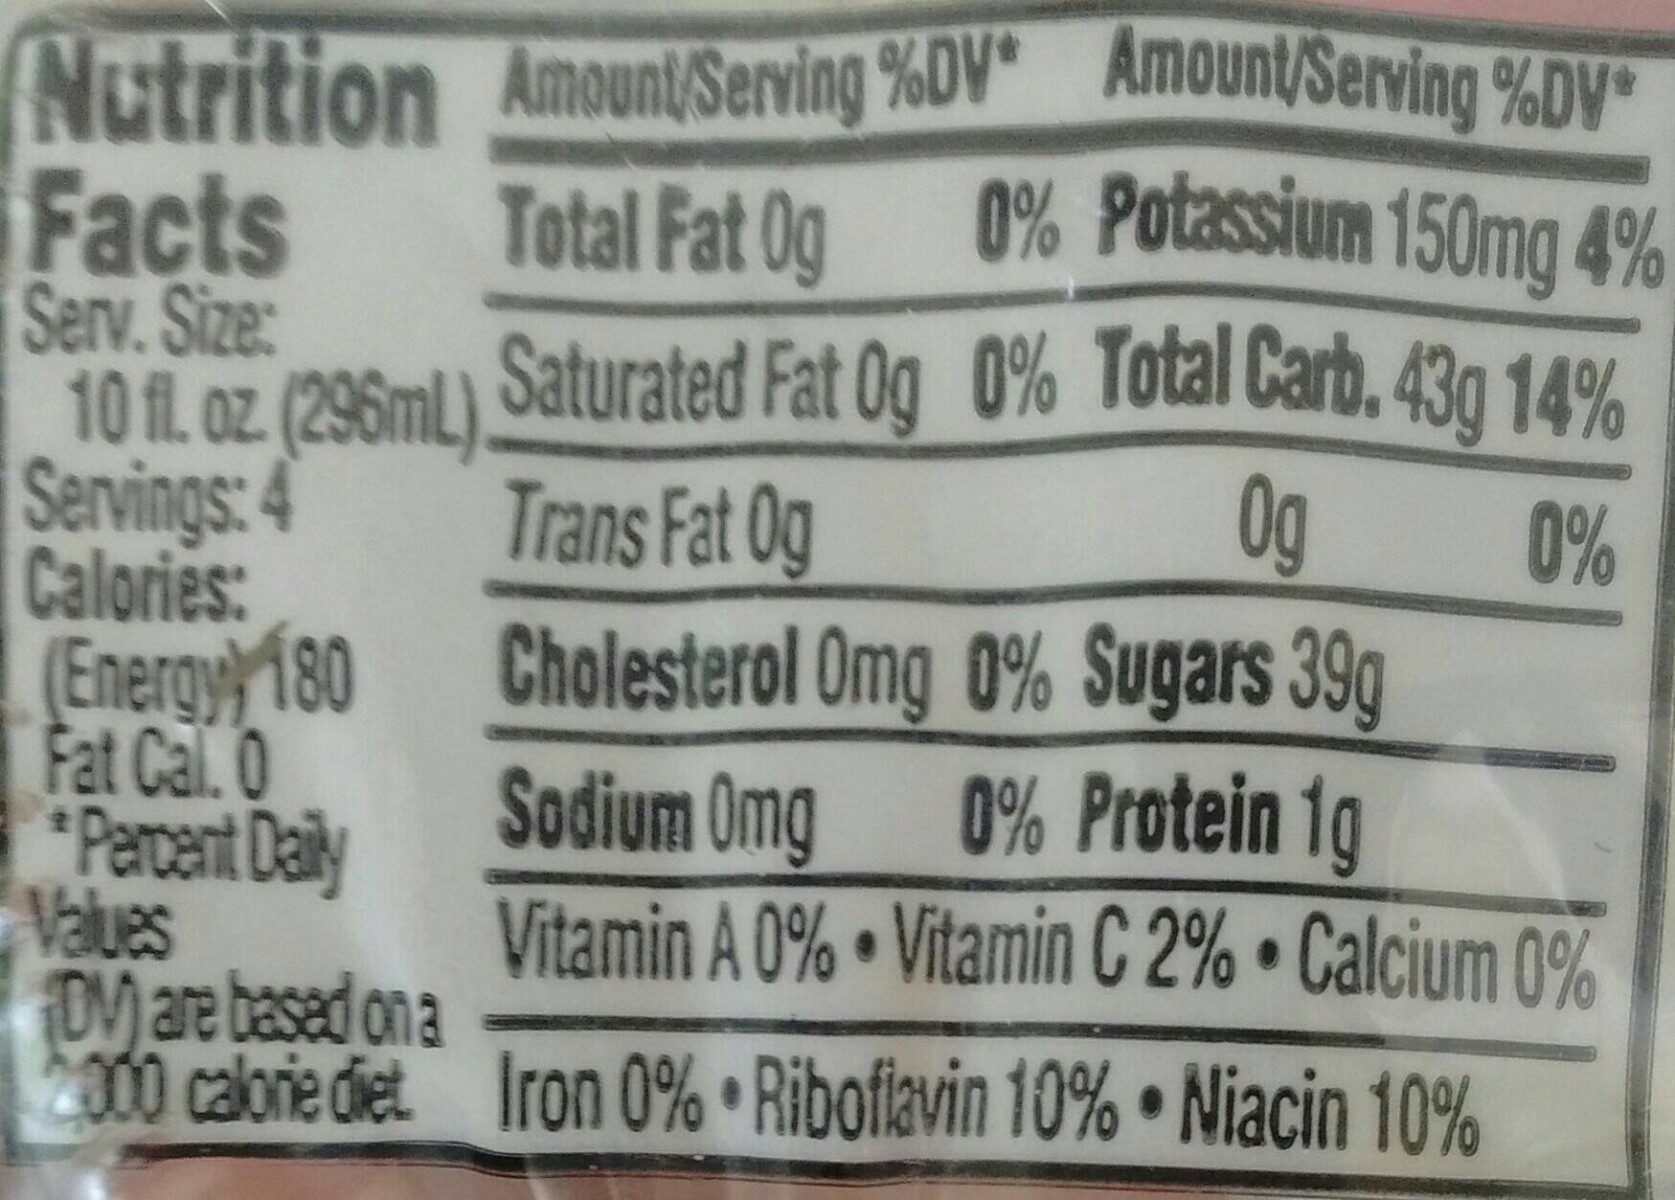 Martinelli's Gold Medal - Nutrition facts